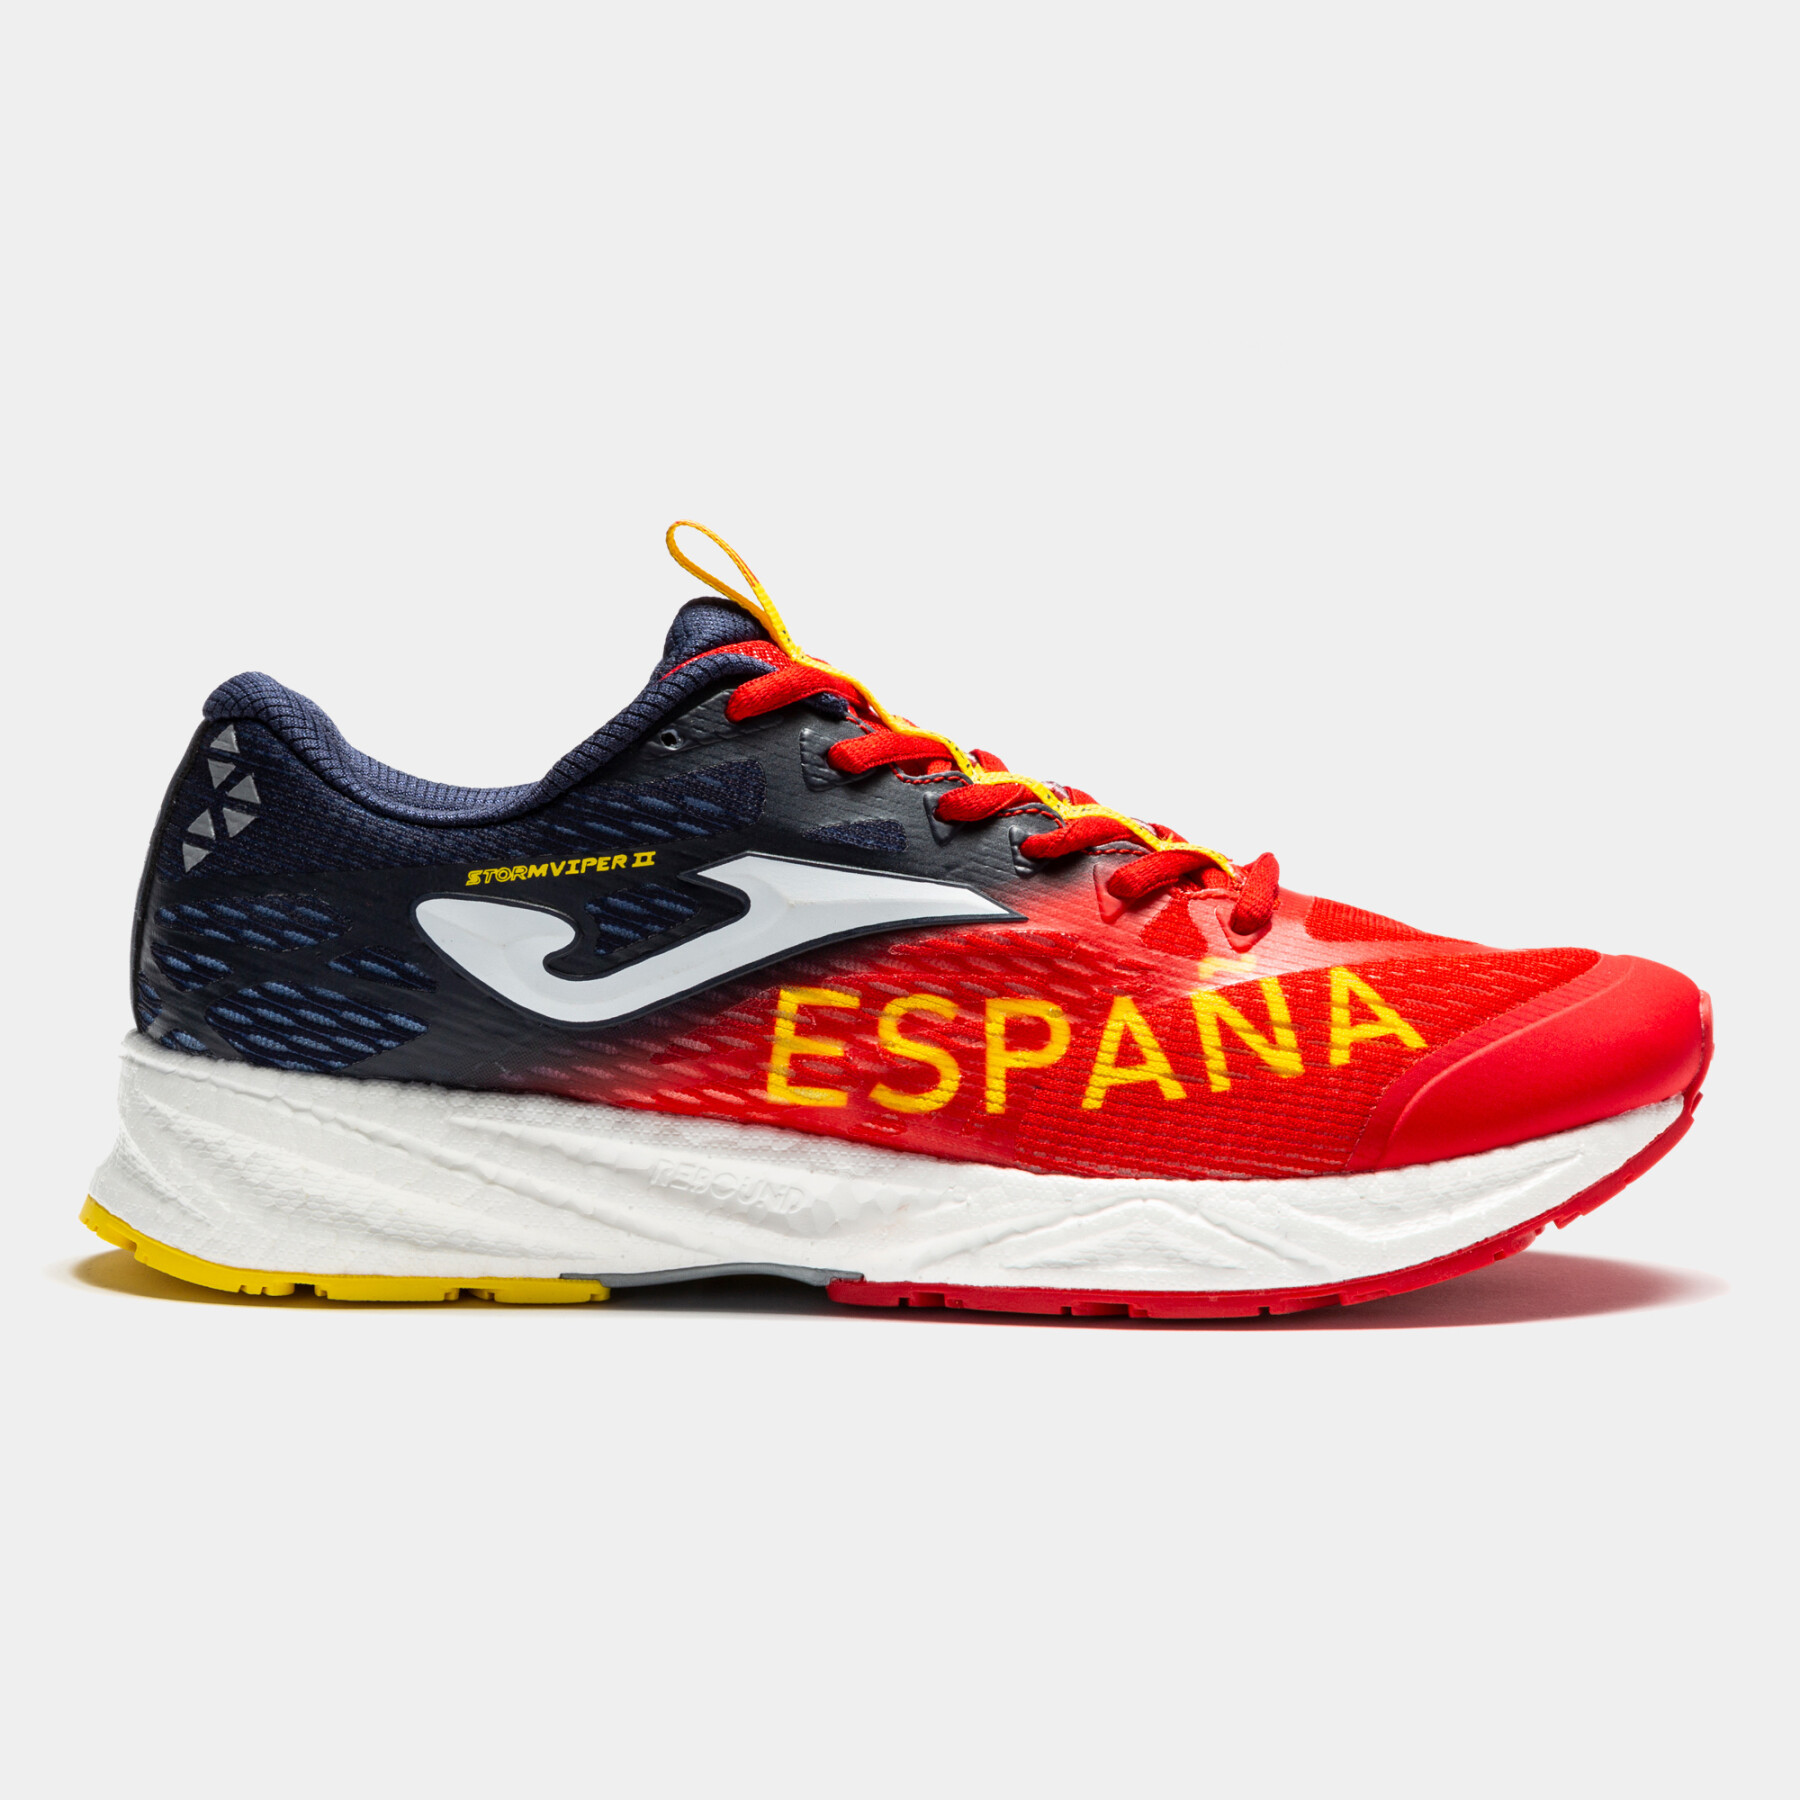 Spanish Olympic Committee shoes storm viper r